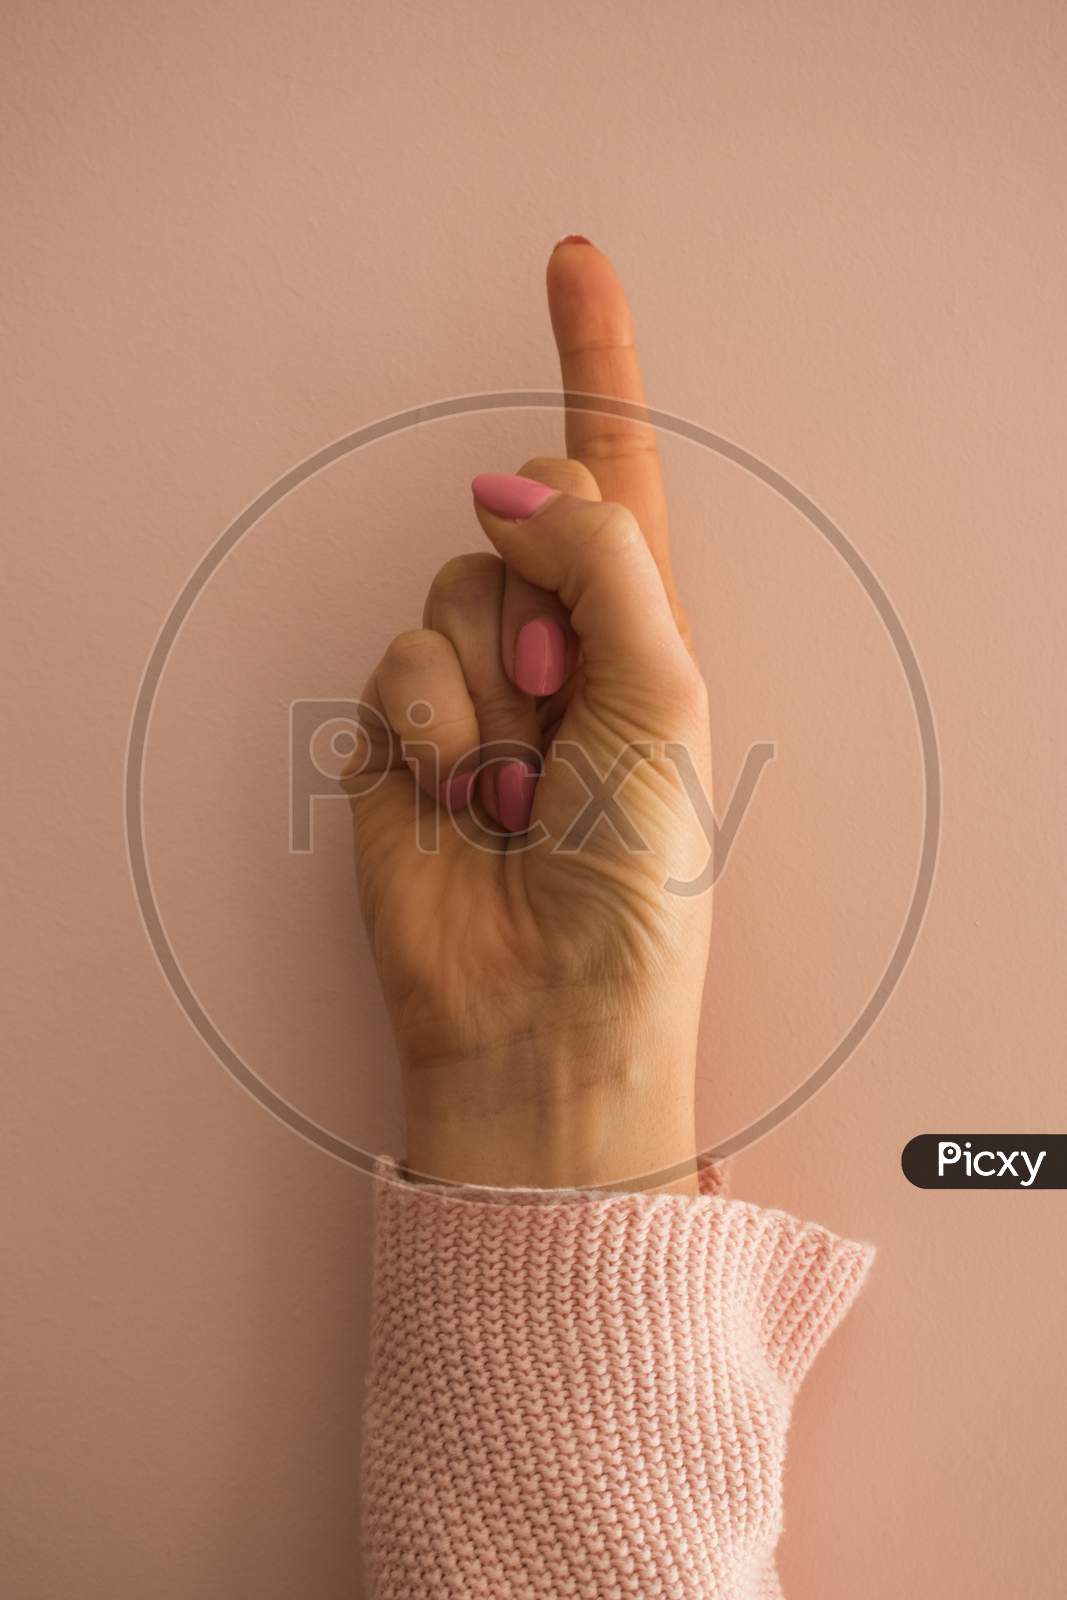 A Female Hand With The Index Finger Pointing Up